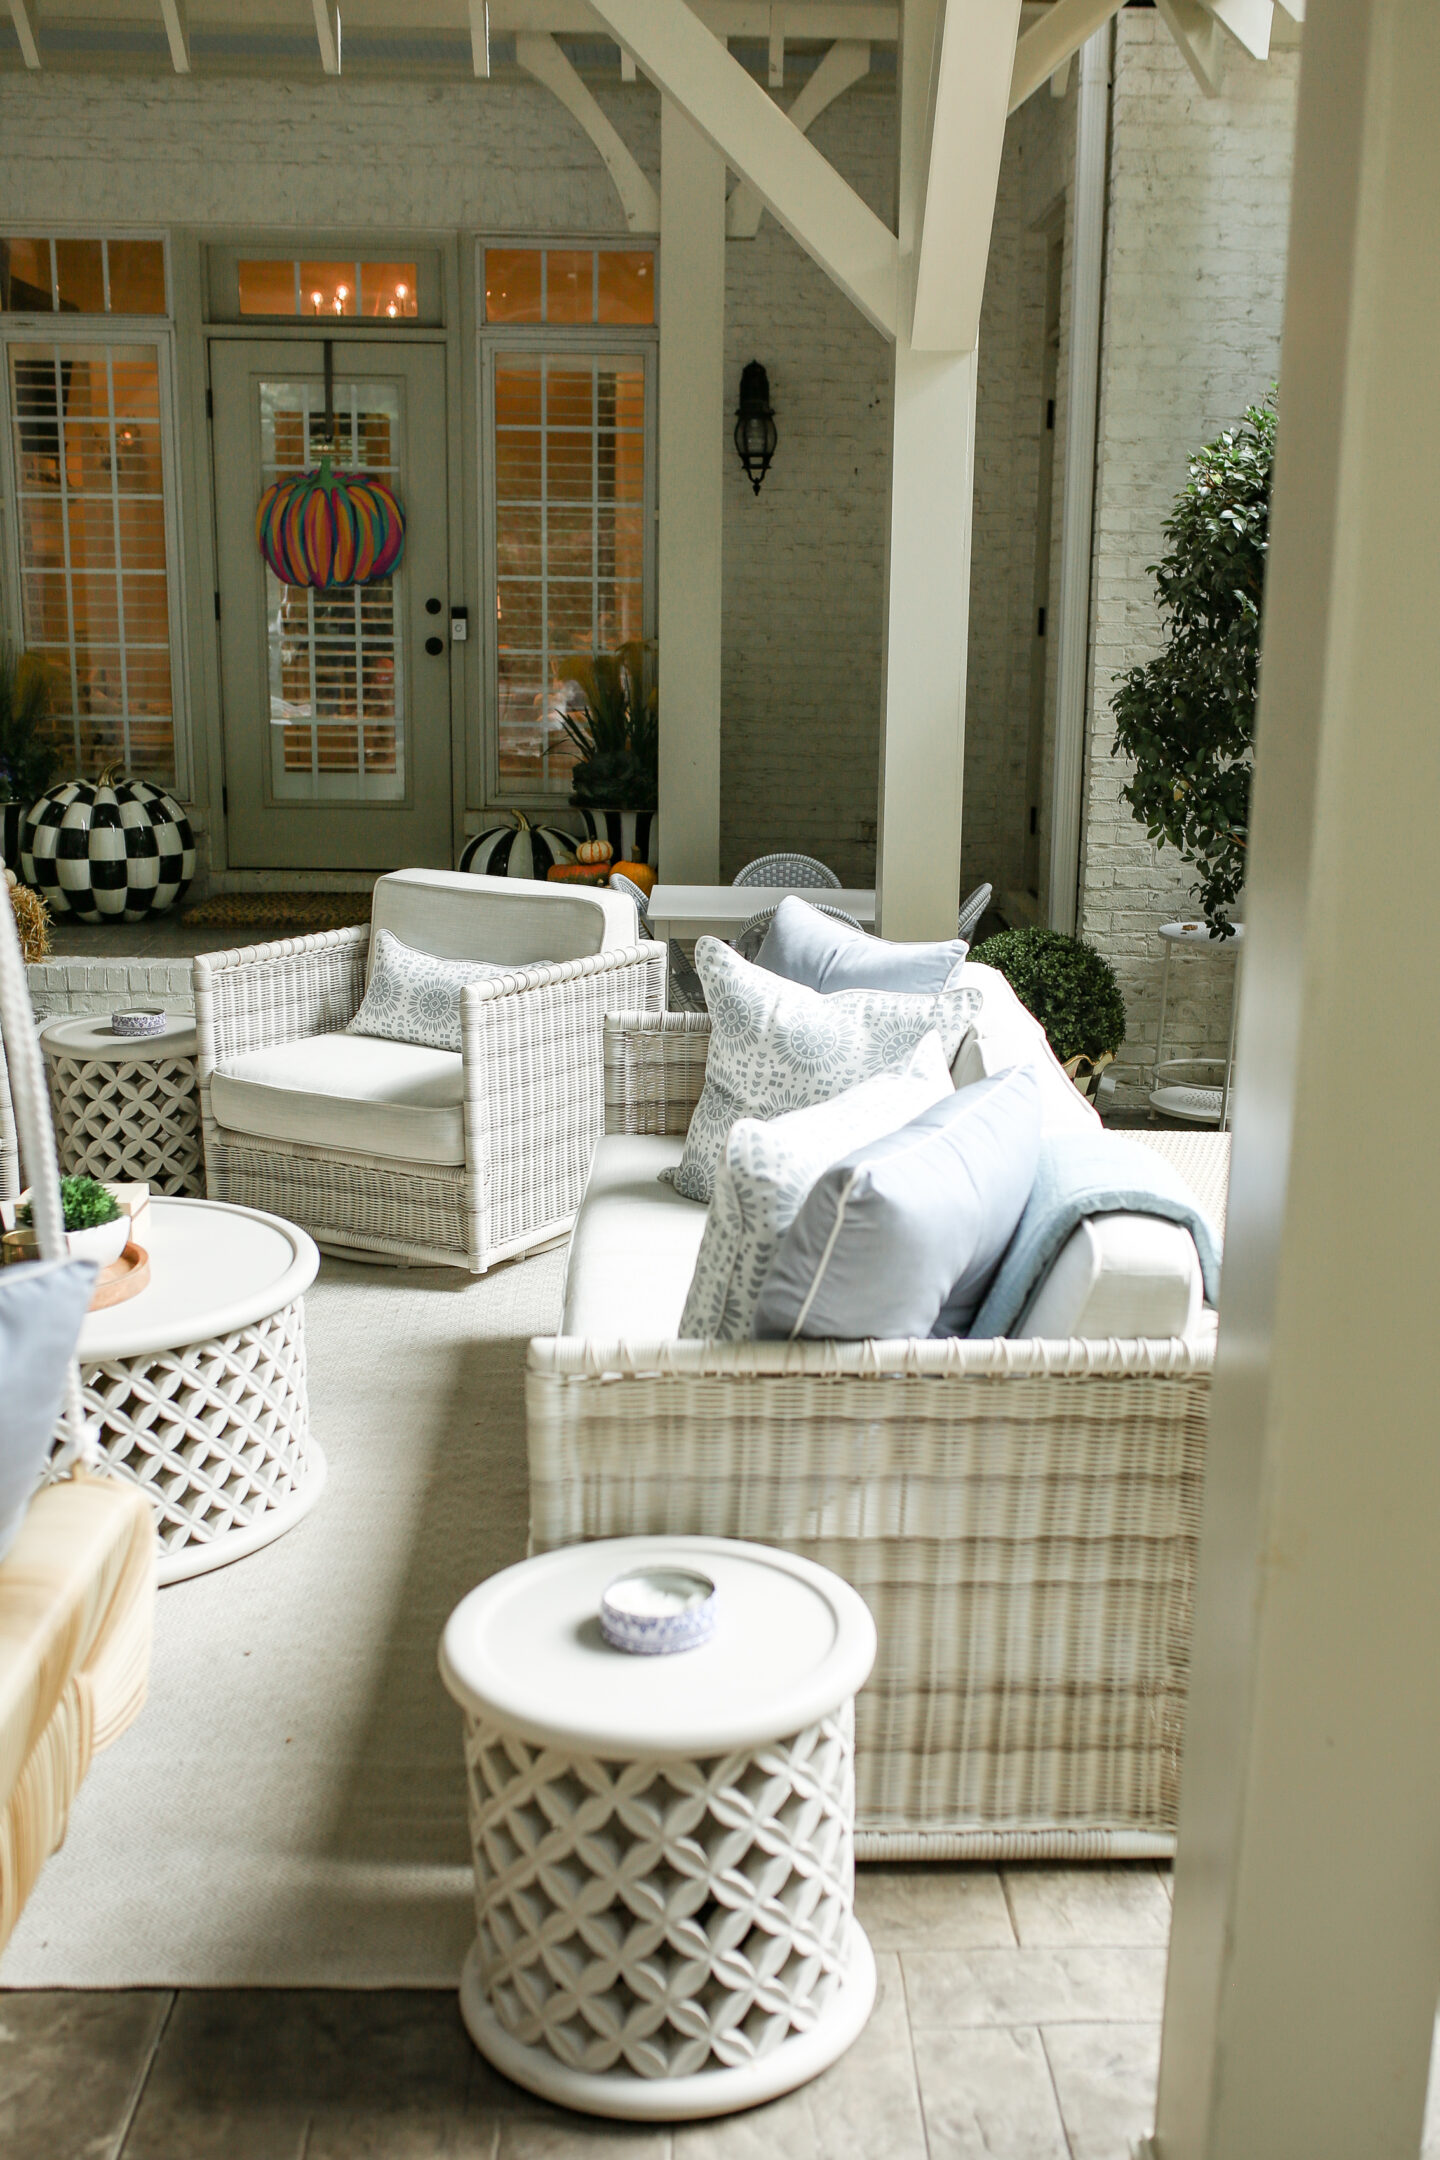 wicker furniture with white cushions on back patio